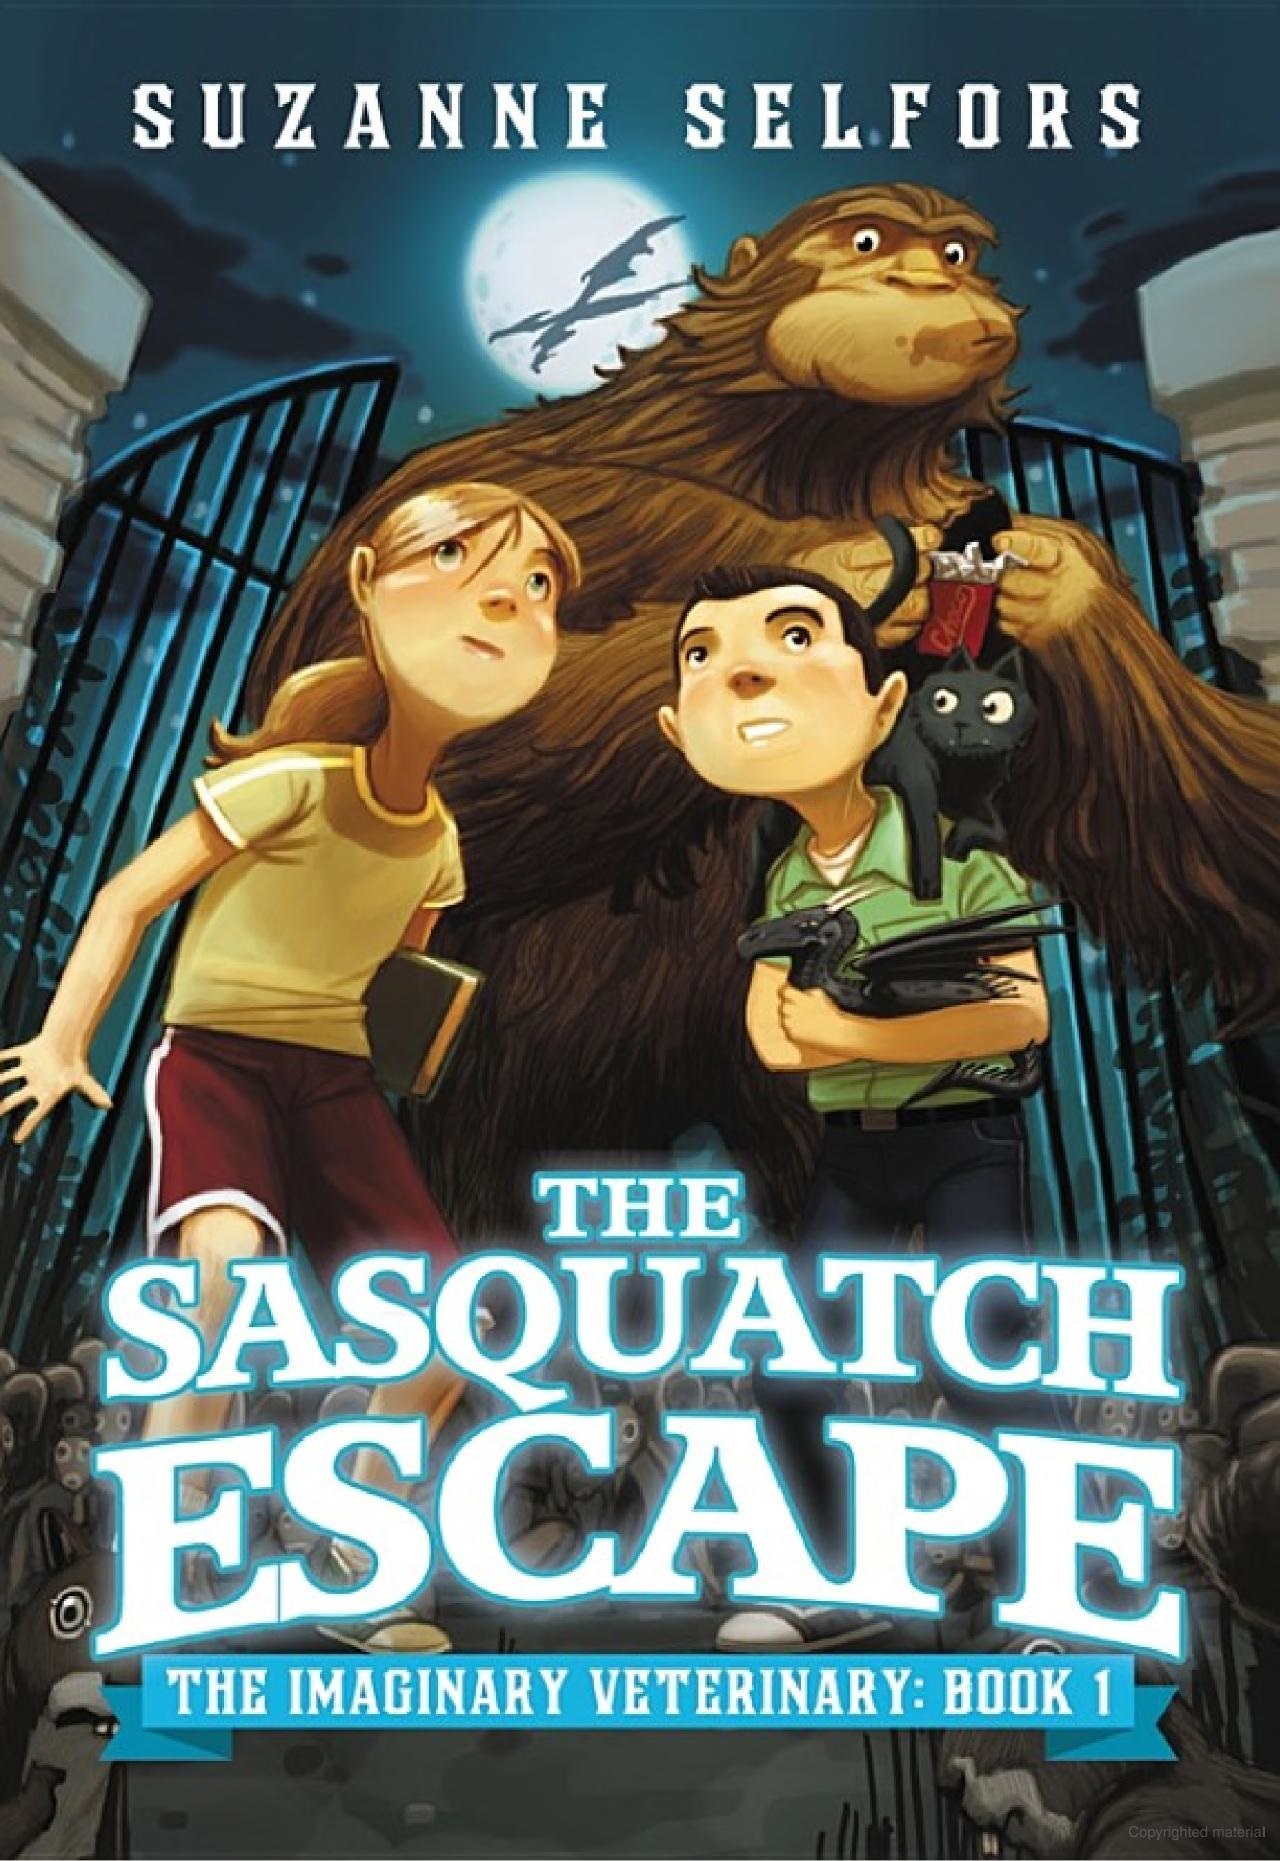 A boy and a girl facing forward with a giant Sasquatch behind them